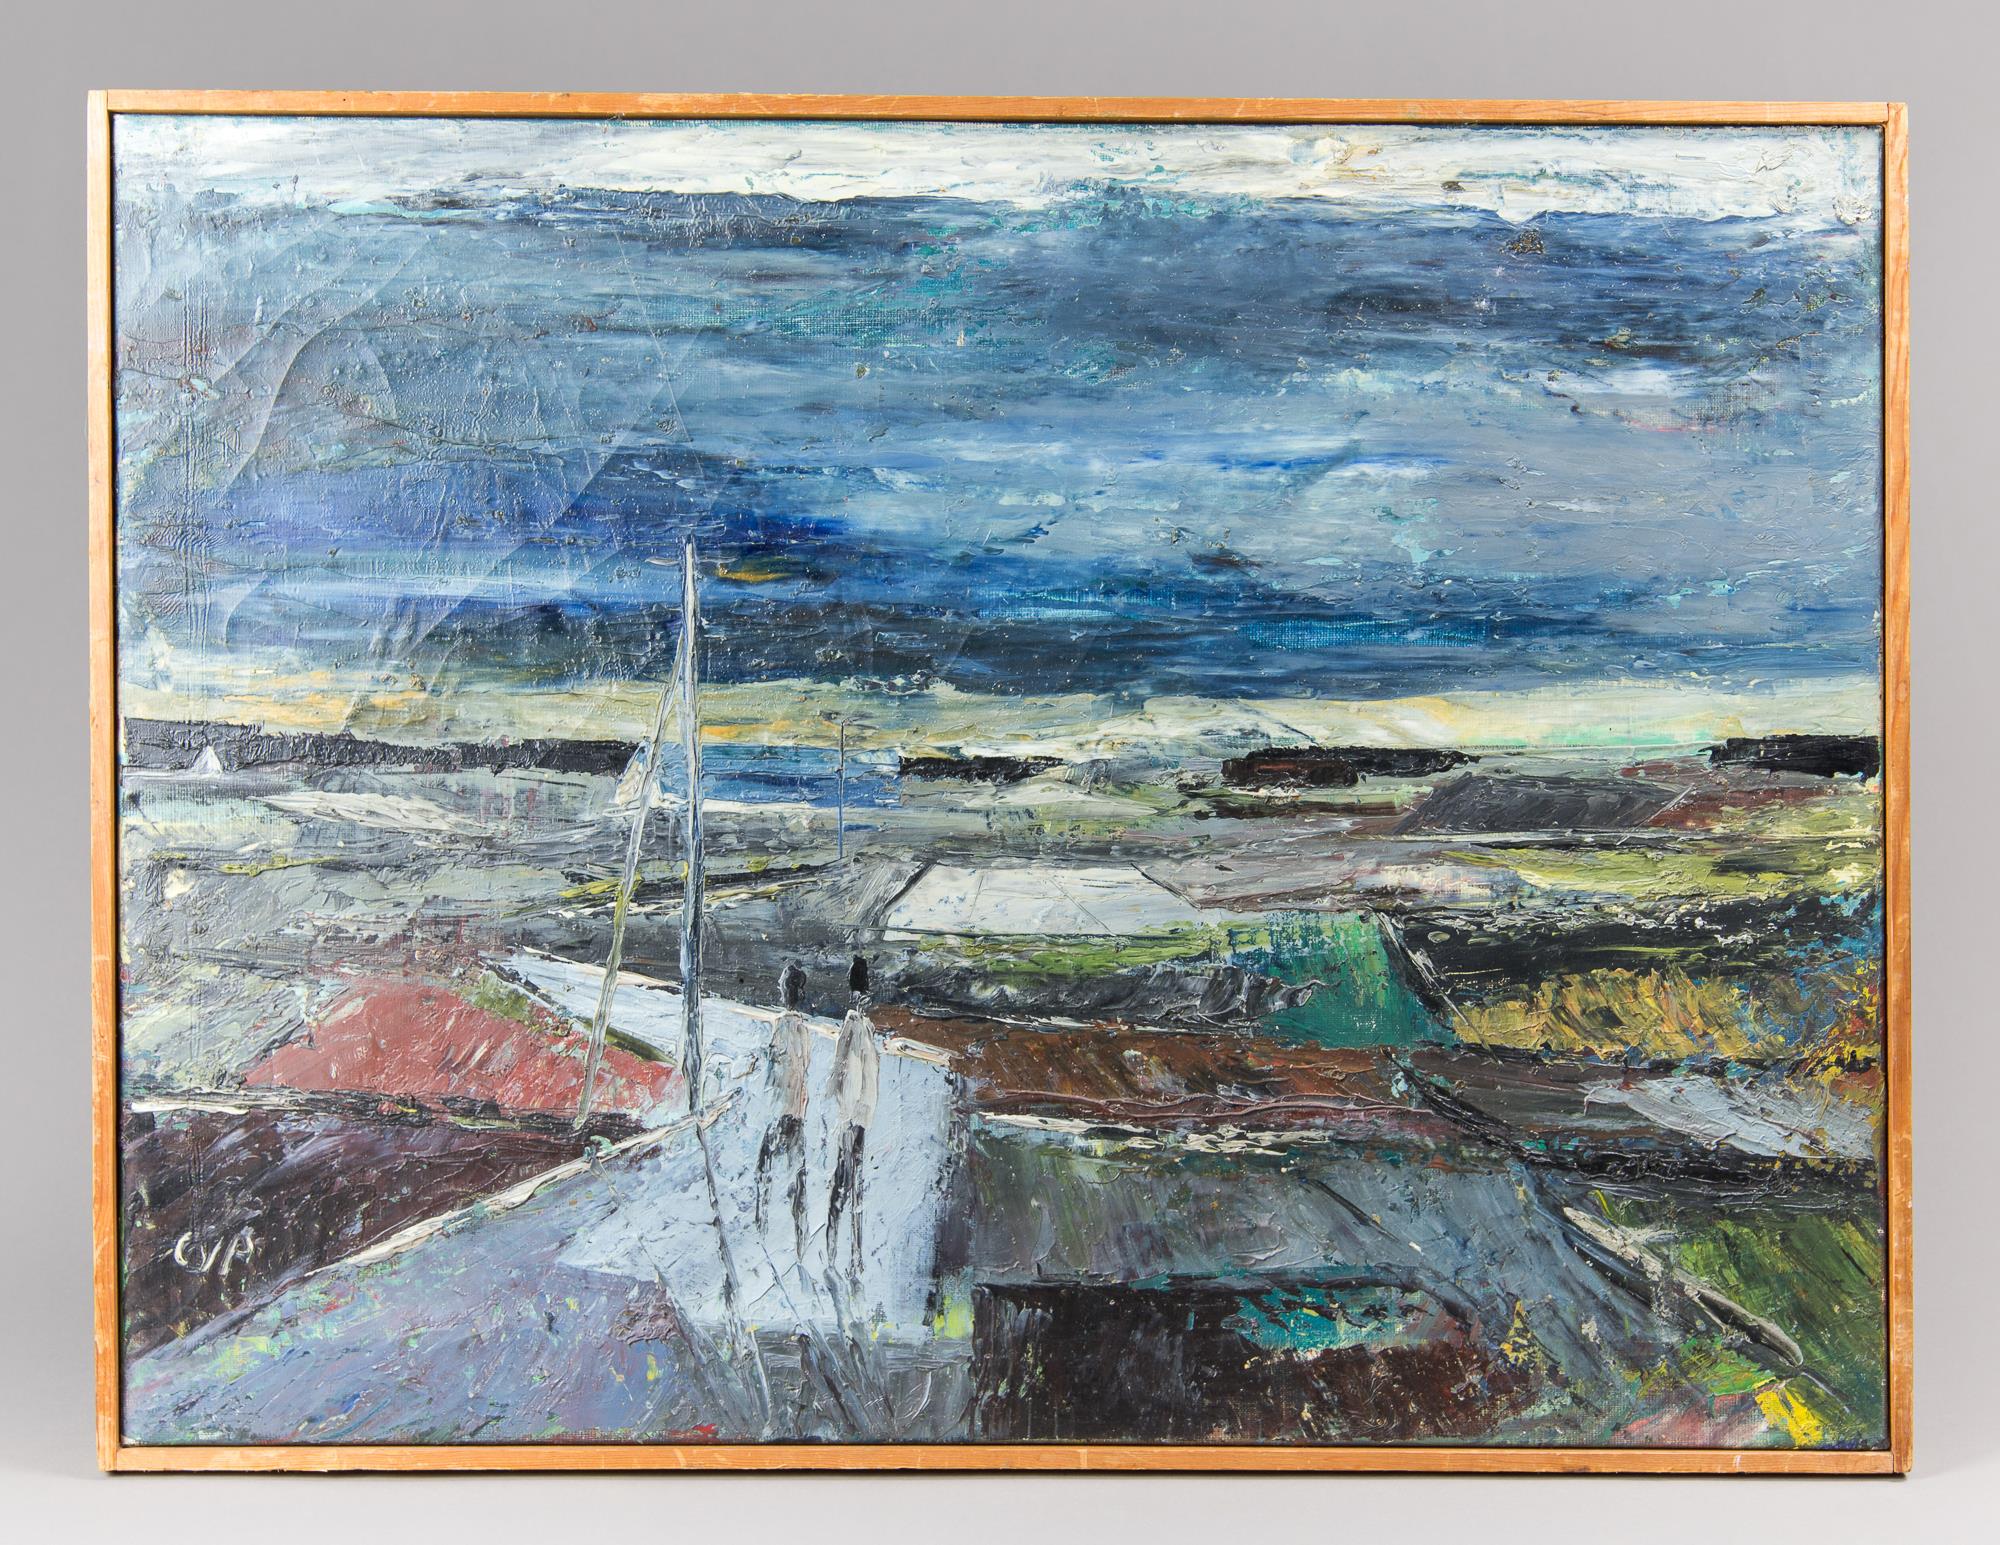 A MID-20TH CENTURY LANDSCAPE OIL ON CANVAS, C1950. With wooden frame. Signed lower left. (h 53cm x w